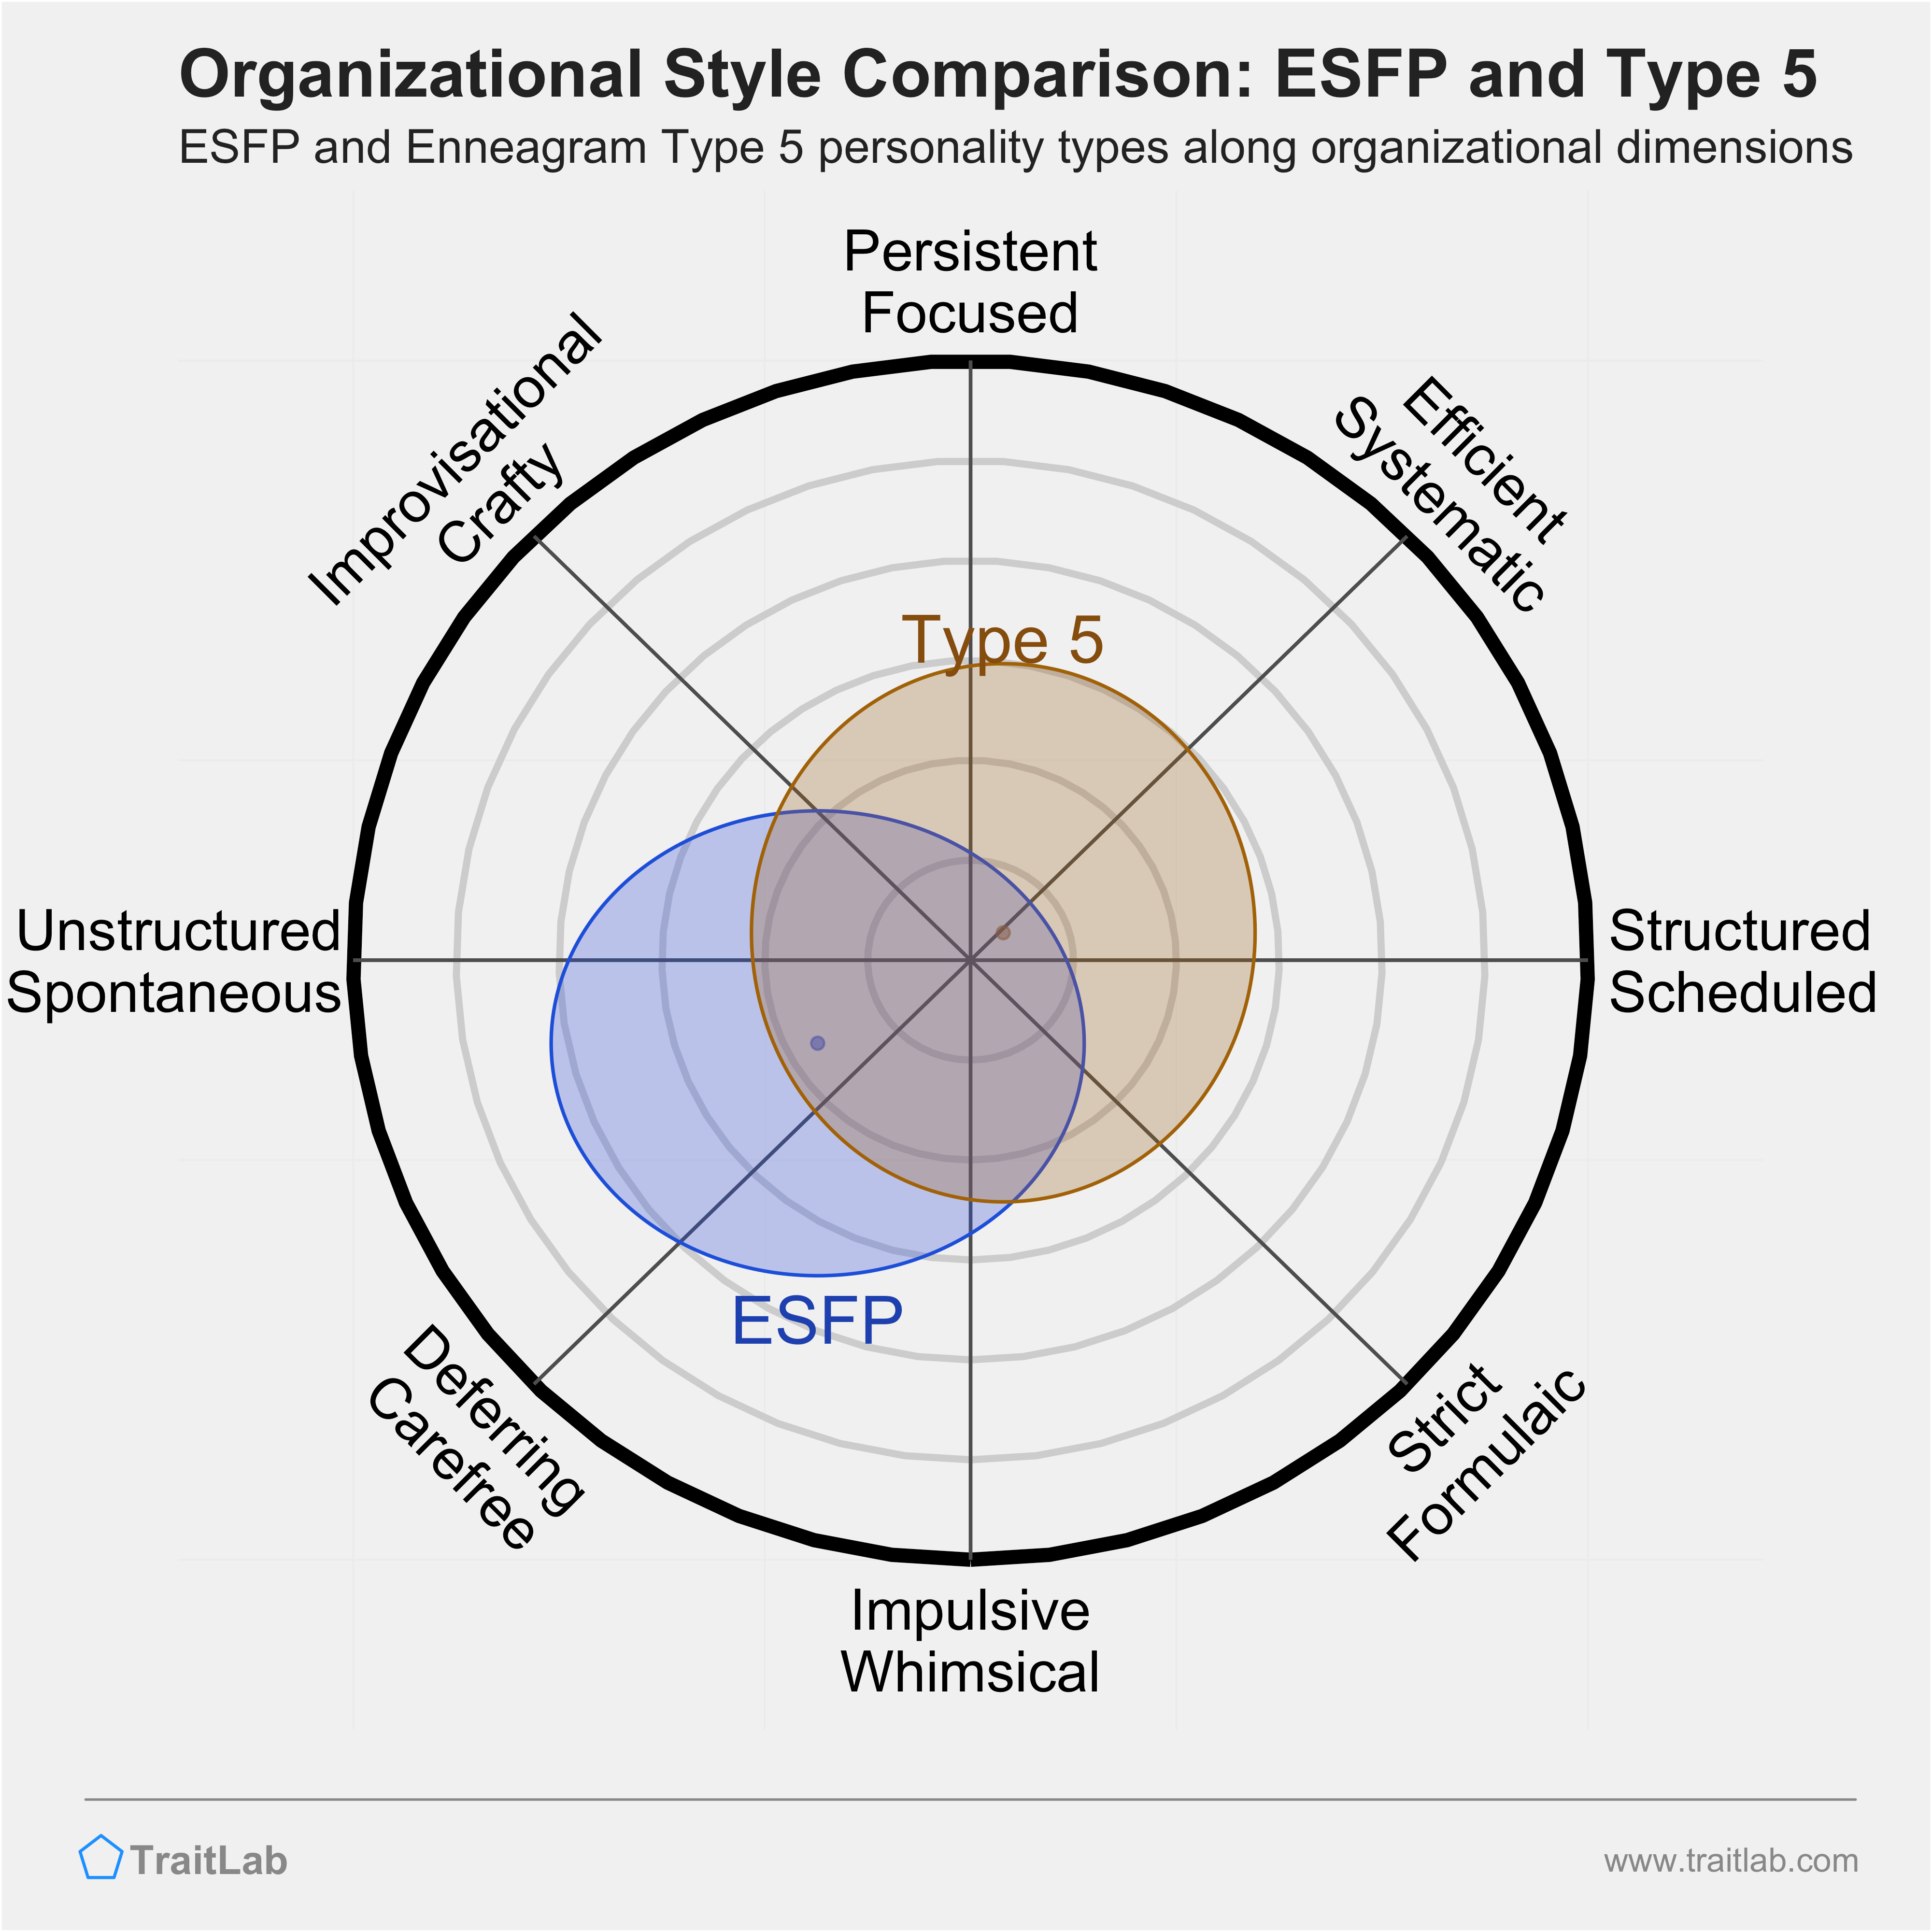 ESFP and Type 5 comparison across organizational dimensions